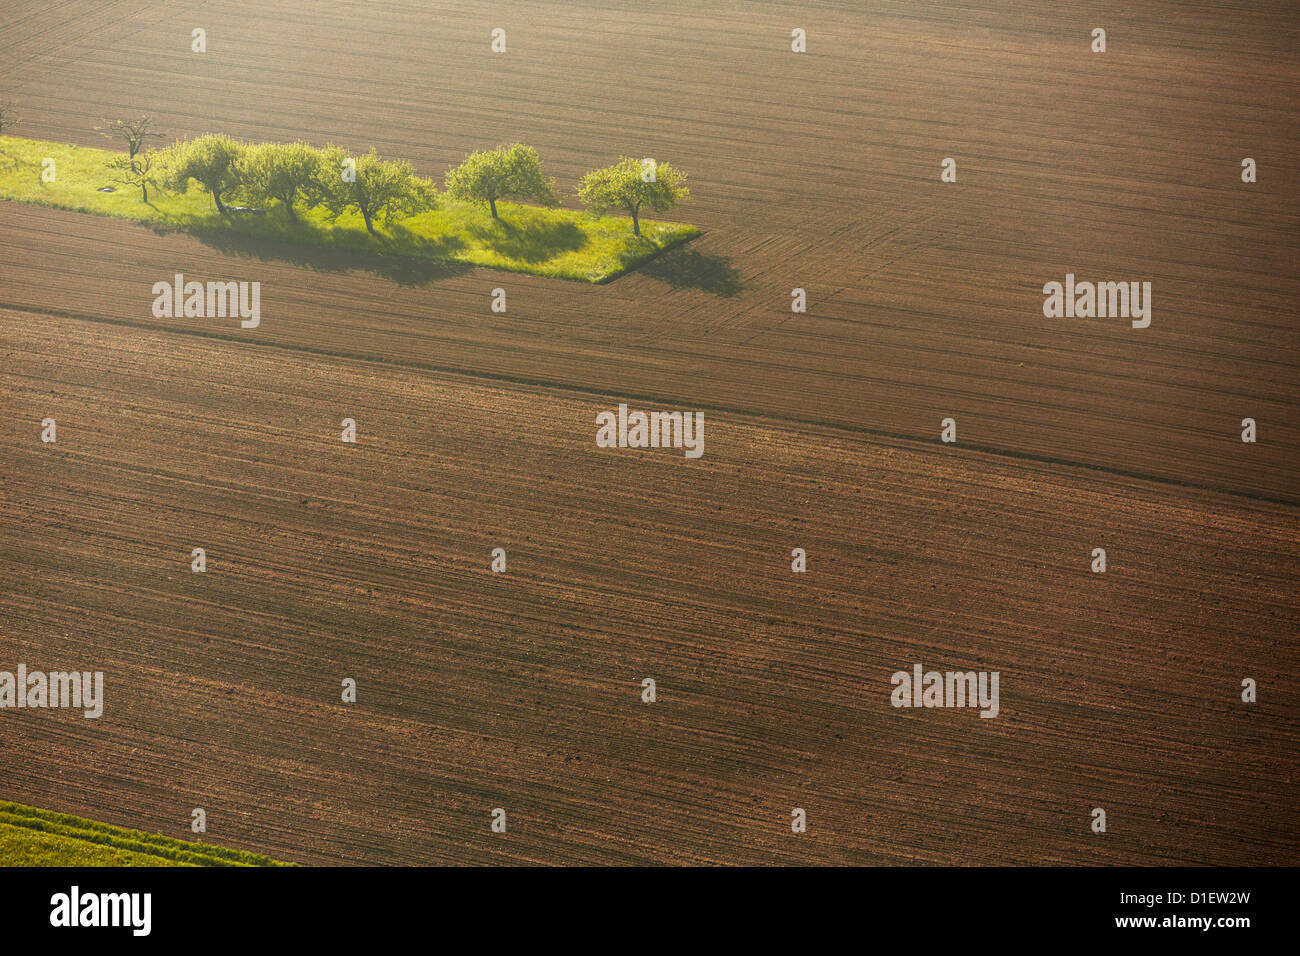 Plowed field with green area, aerial photo Stock Photo